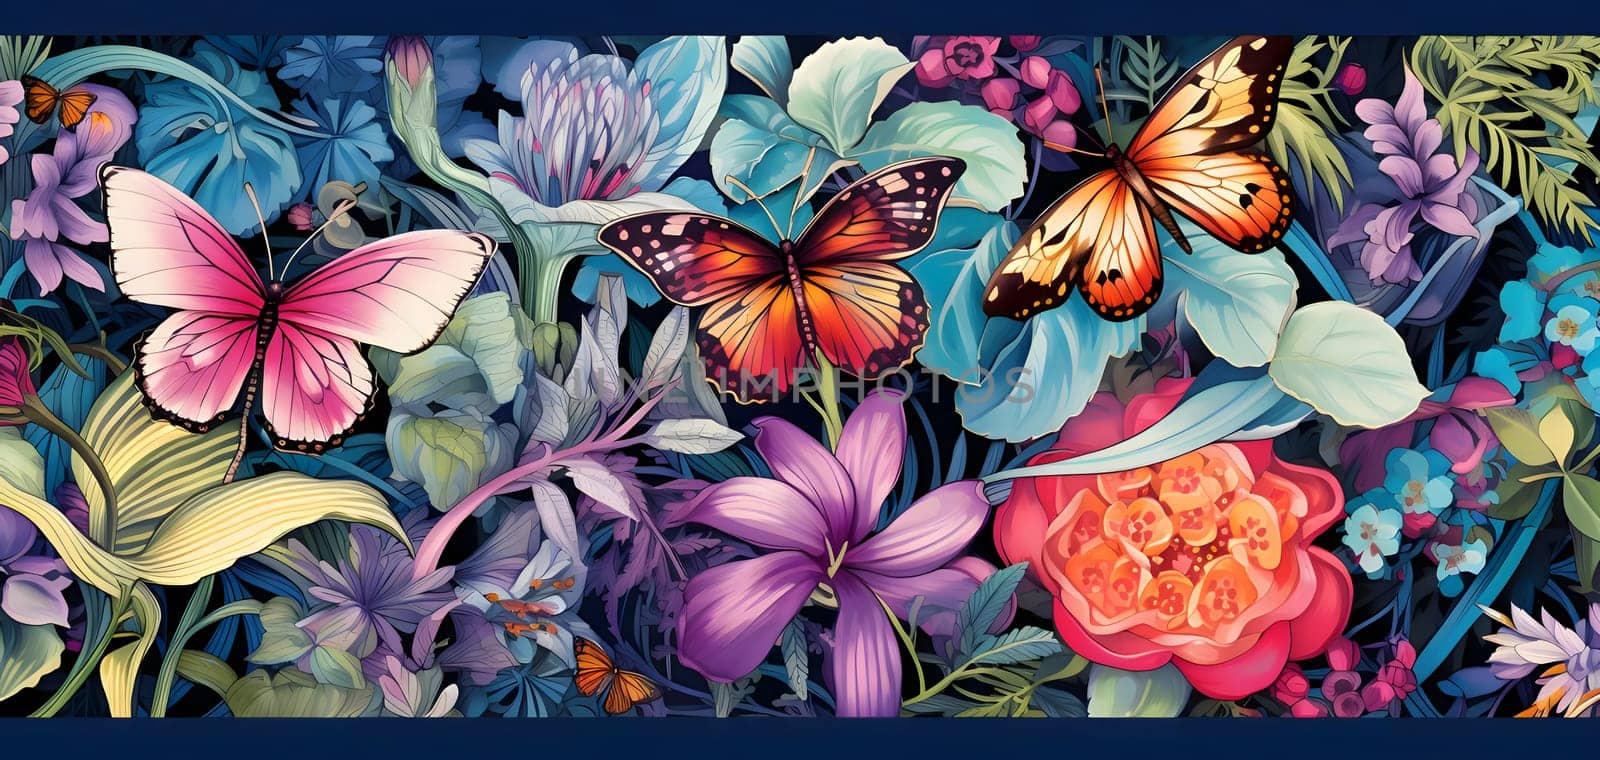 Patterns and banners backgrounds: Seamless floral border with flowers and butterflies. Vector illustration.